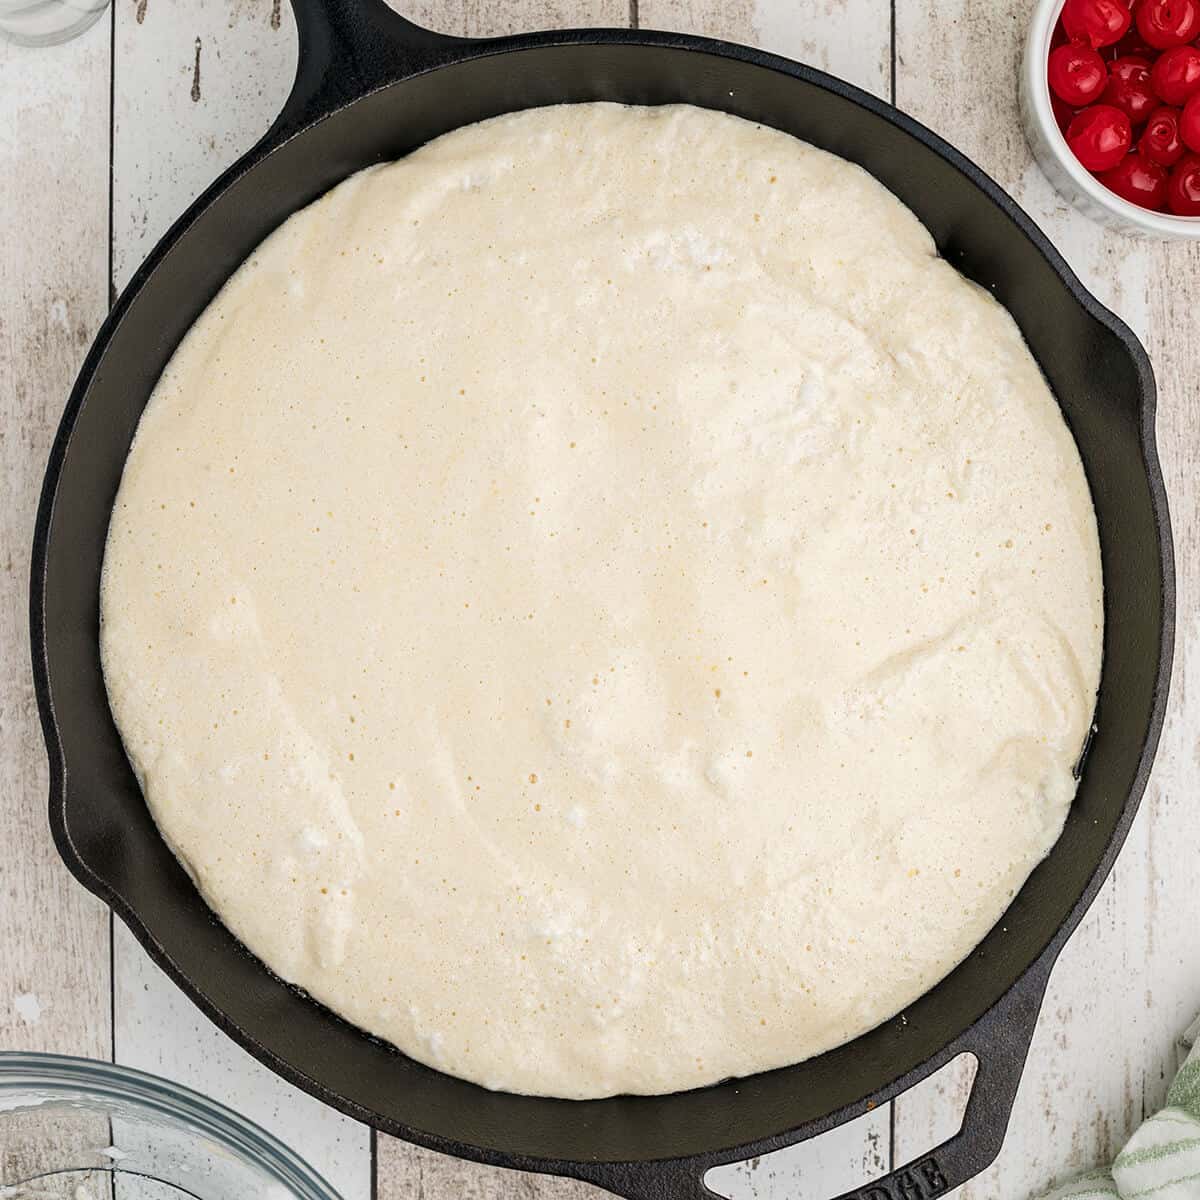 Cake batter completely added to cast iron skillet.